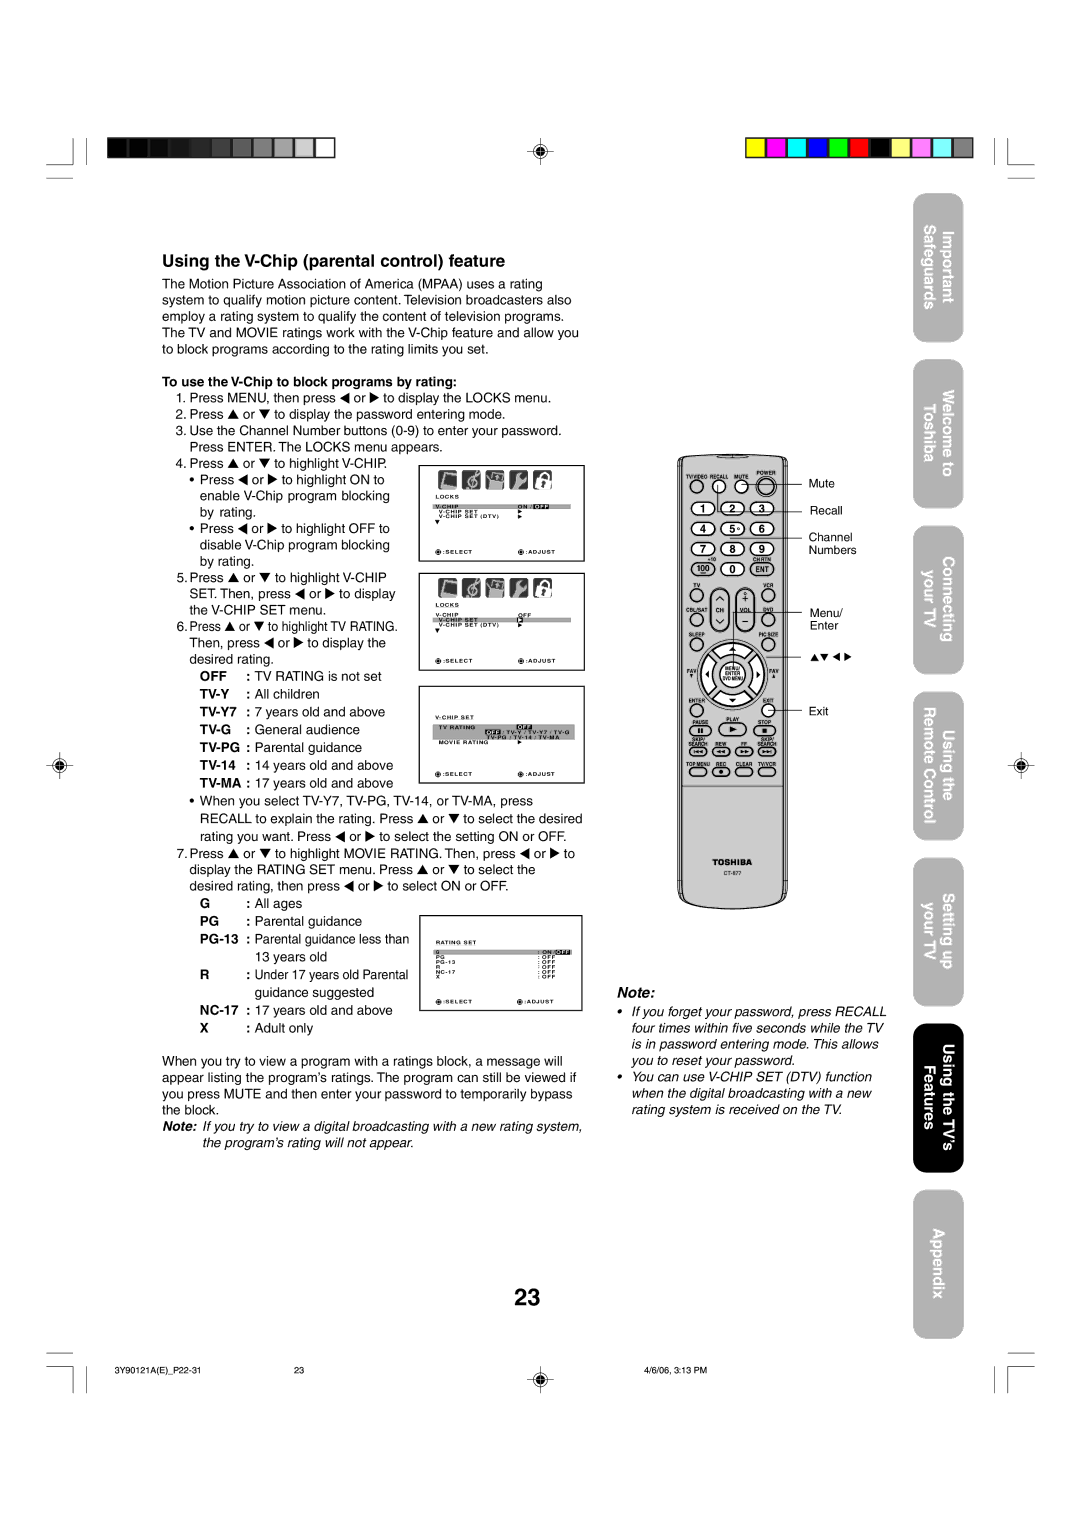 Toshiba 26DF56 appendix Using the V-Chip parental control feature, Off, Tv-Y, Tv-G 